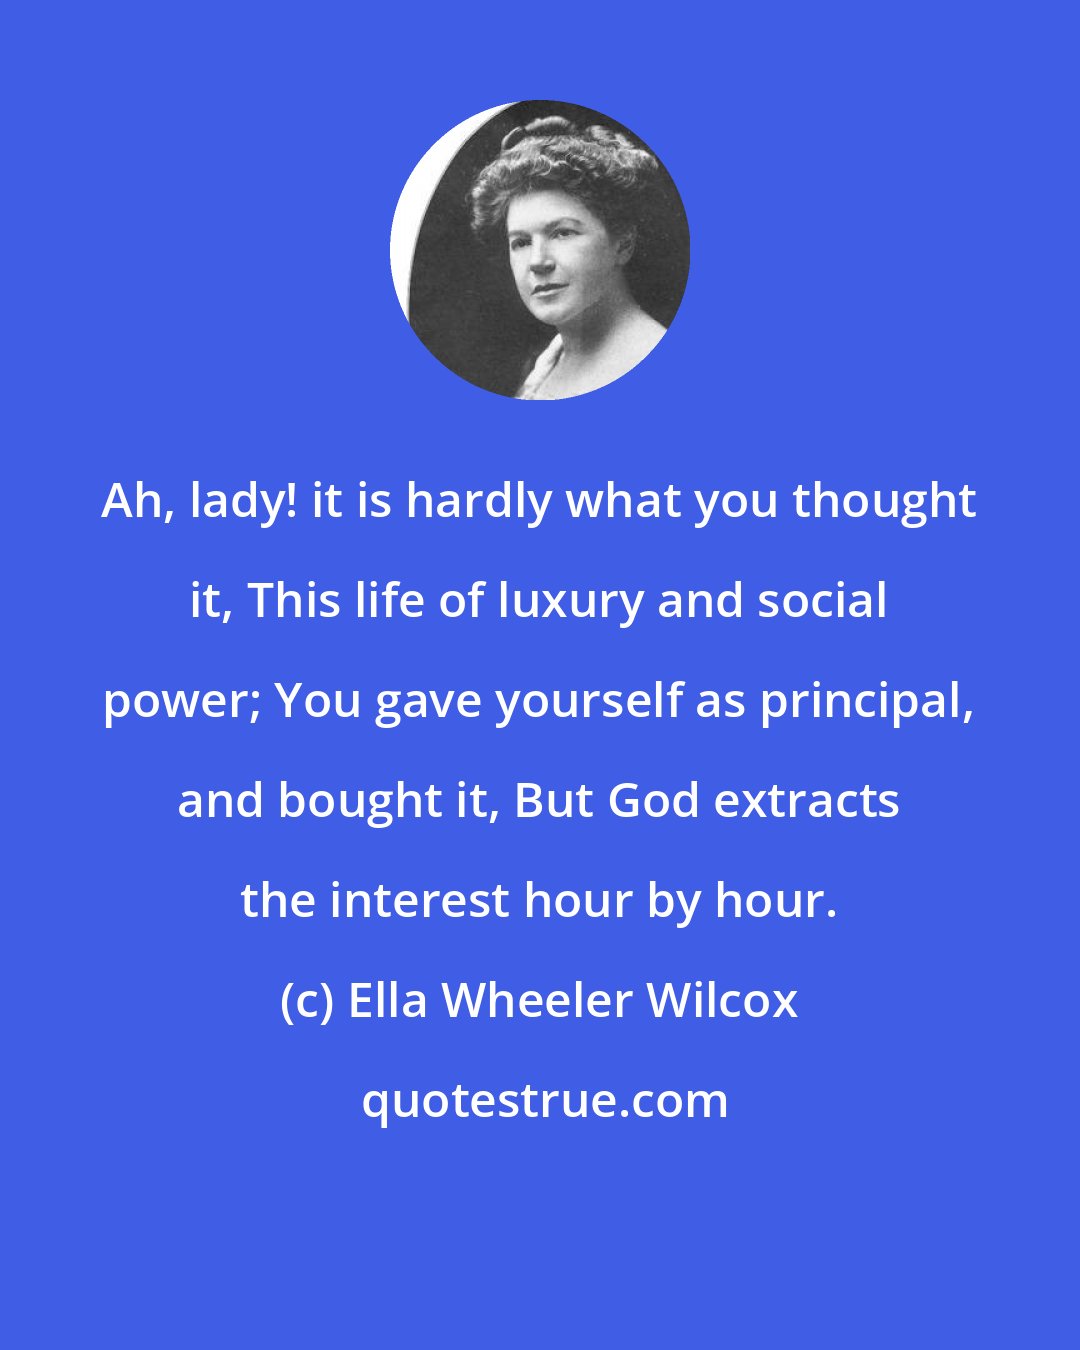 Ella Wheeler Wilcox: Ah, lady! it is hardly what you thought it, This life of luxury and social power; You gave yourself as principal, and bought it, But God extracts the interest hour by hour.